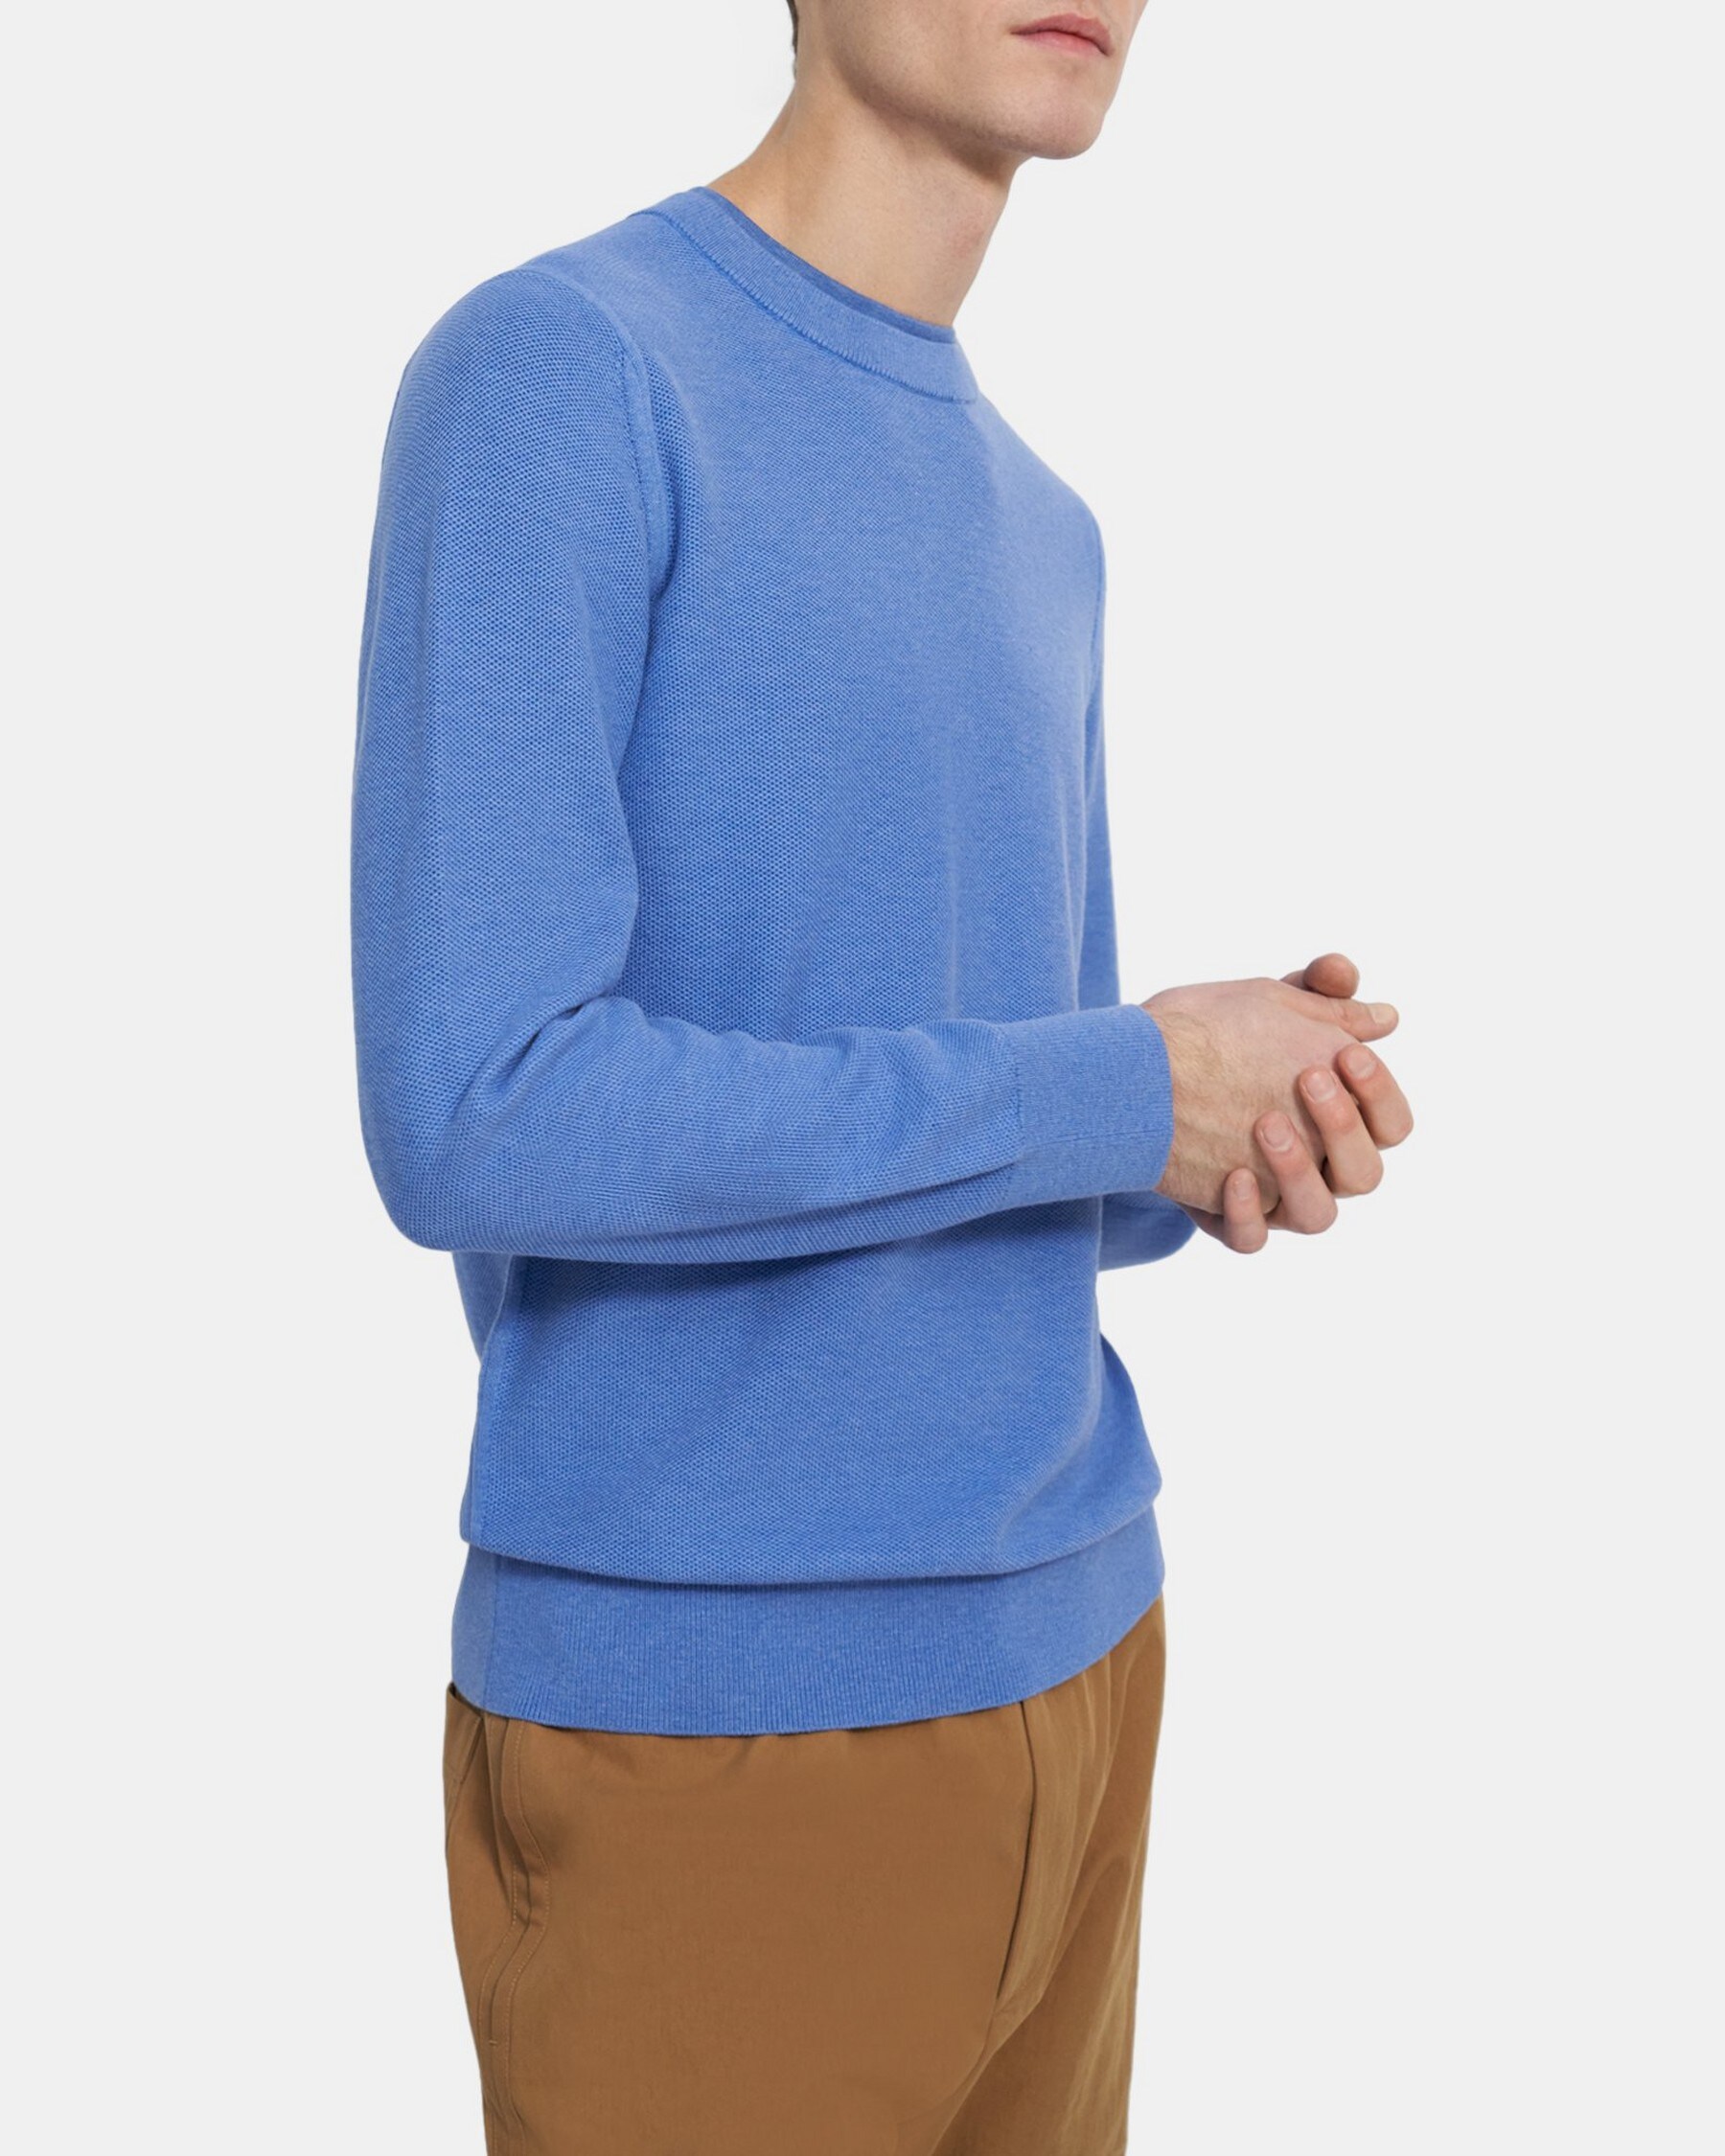 Honeycomb Knit Pullover in Organic Cotton